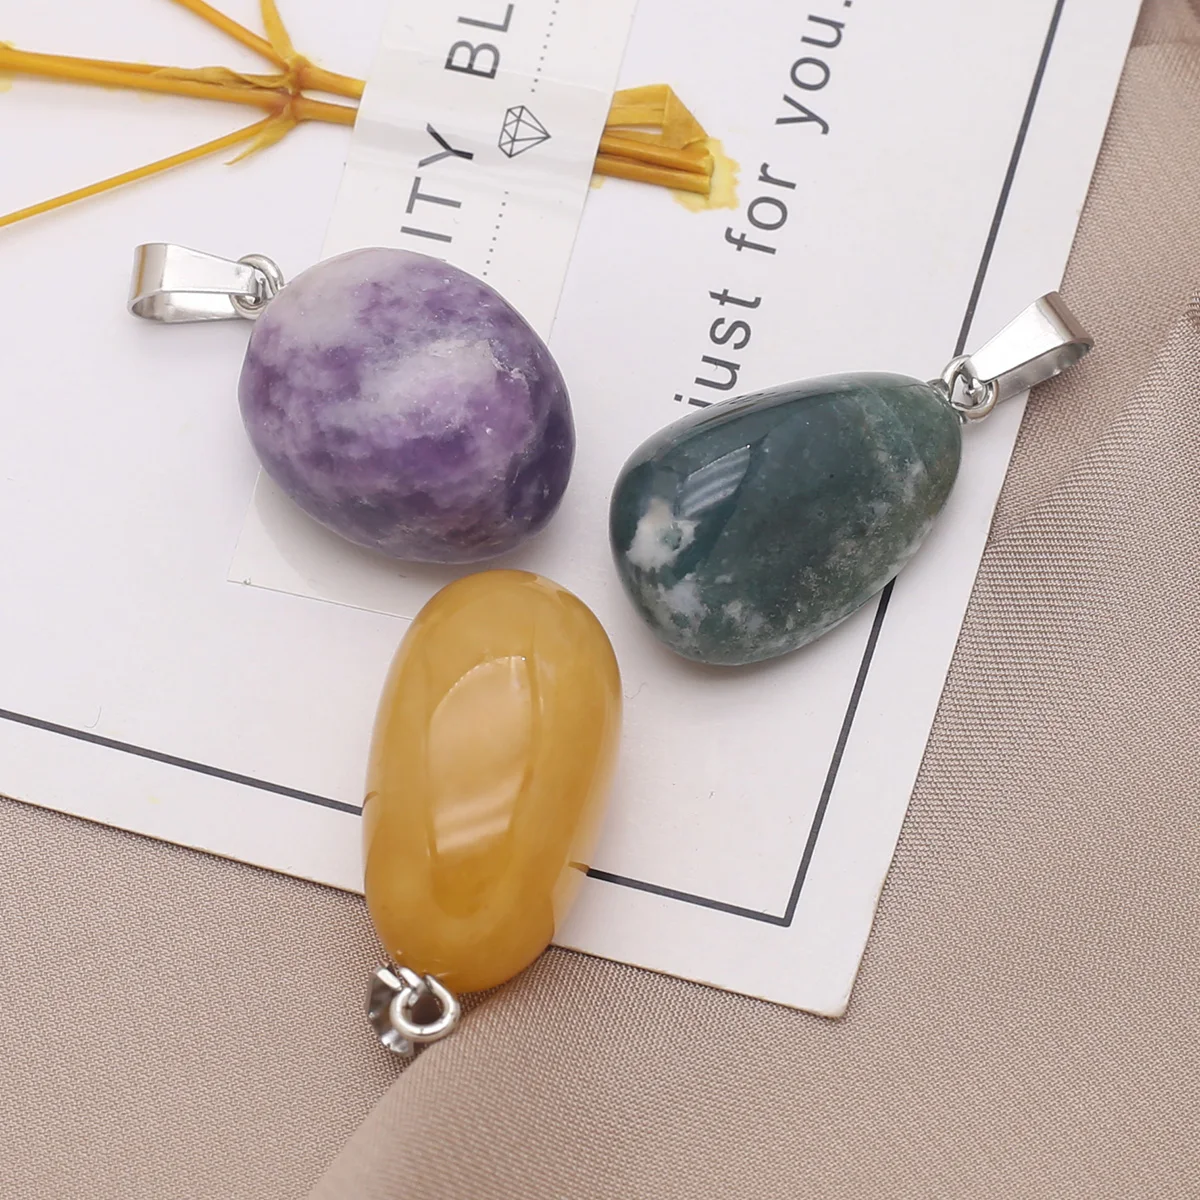 

1PC Natural Stone Pendant Rose Quartz Opal Agate Unakite Turquoise Healing Crystal Stone Charms for Jewelry Making DIY Necklaces